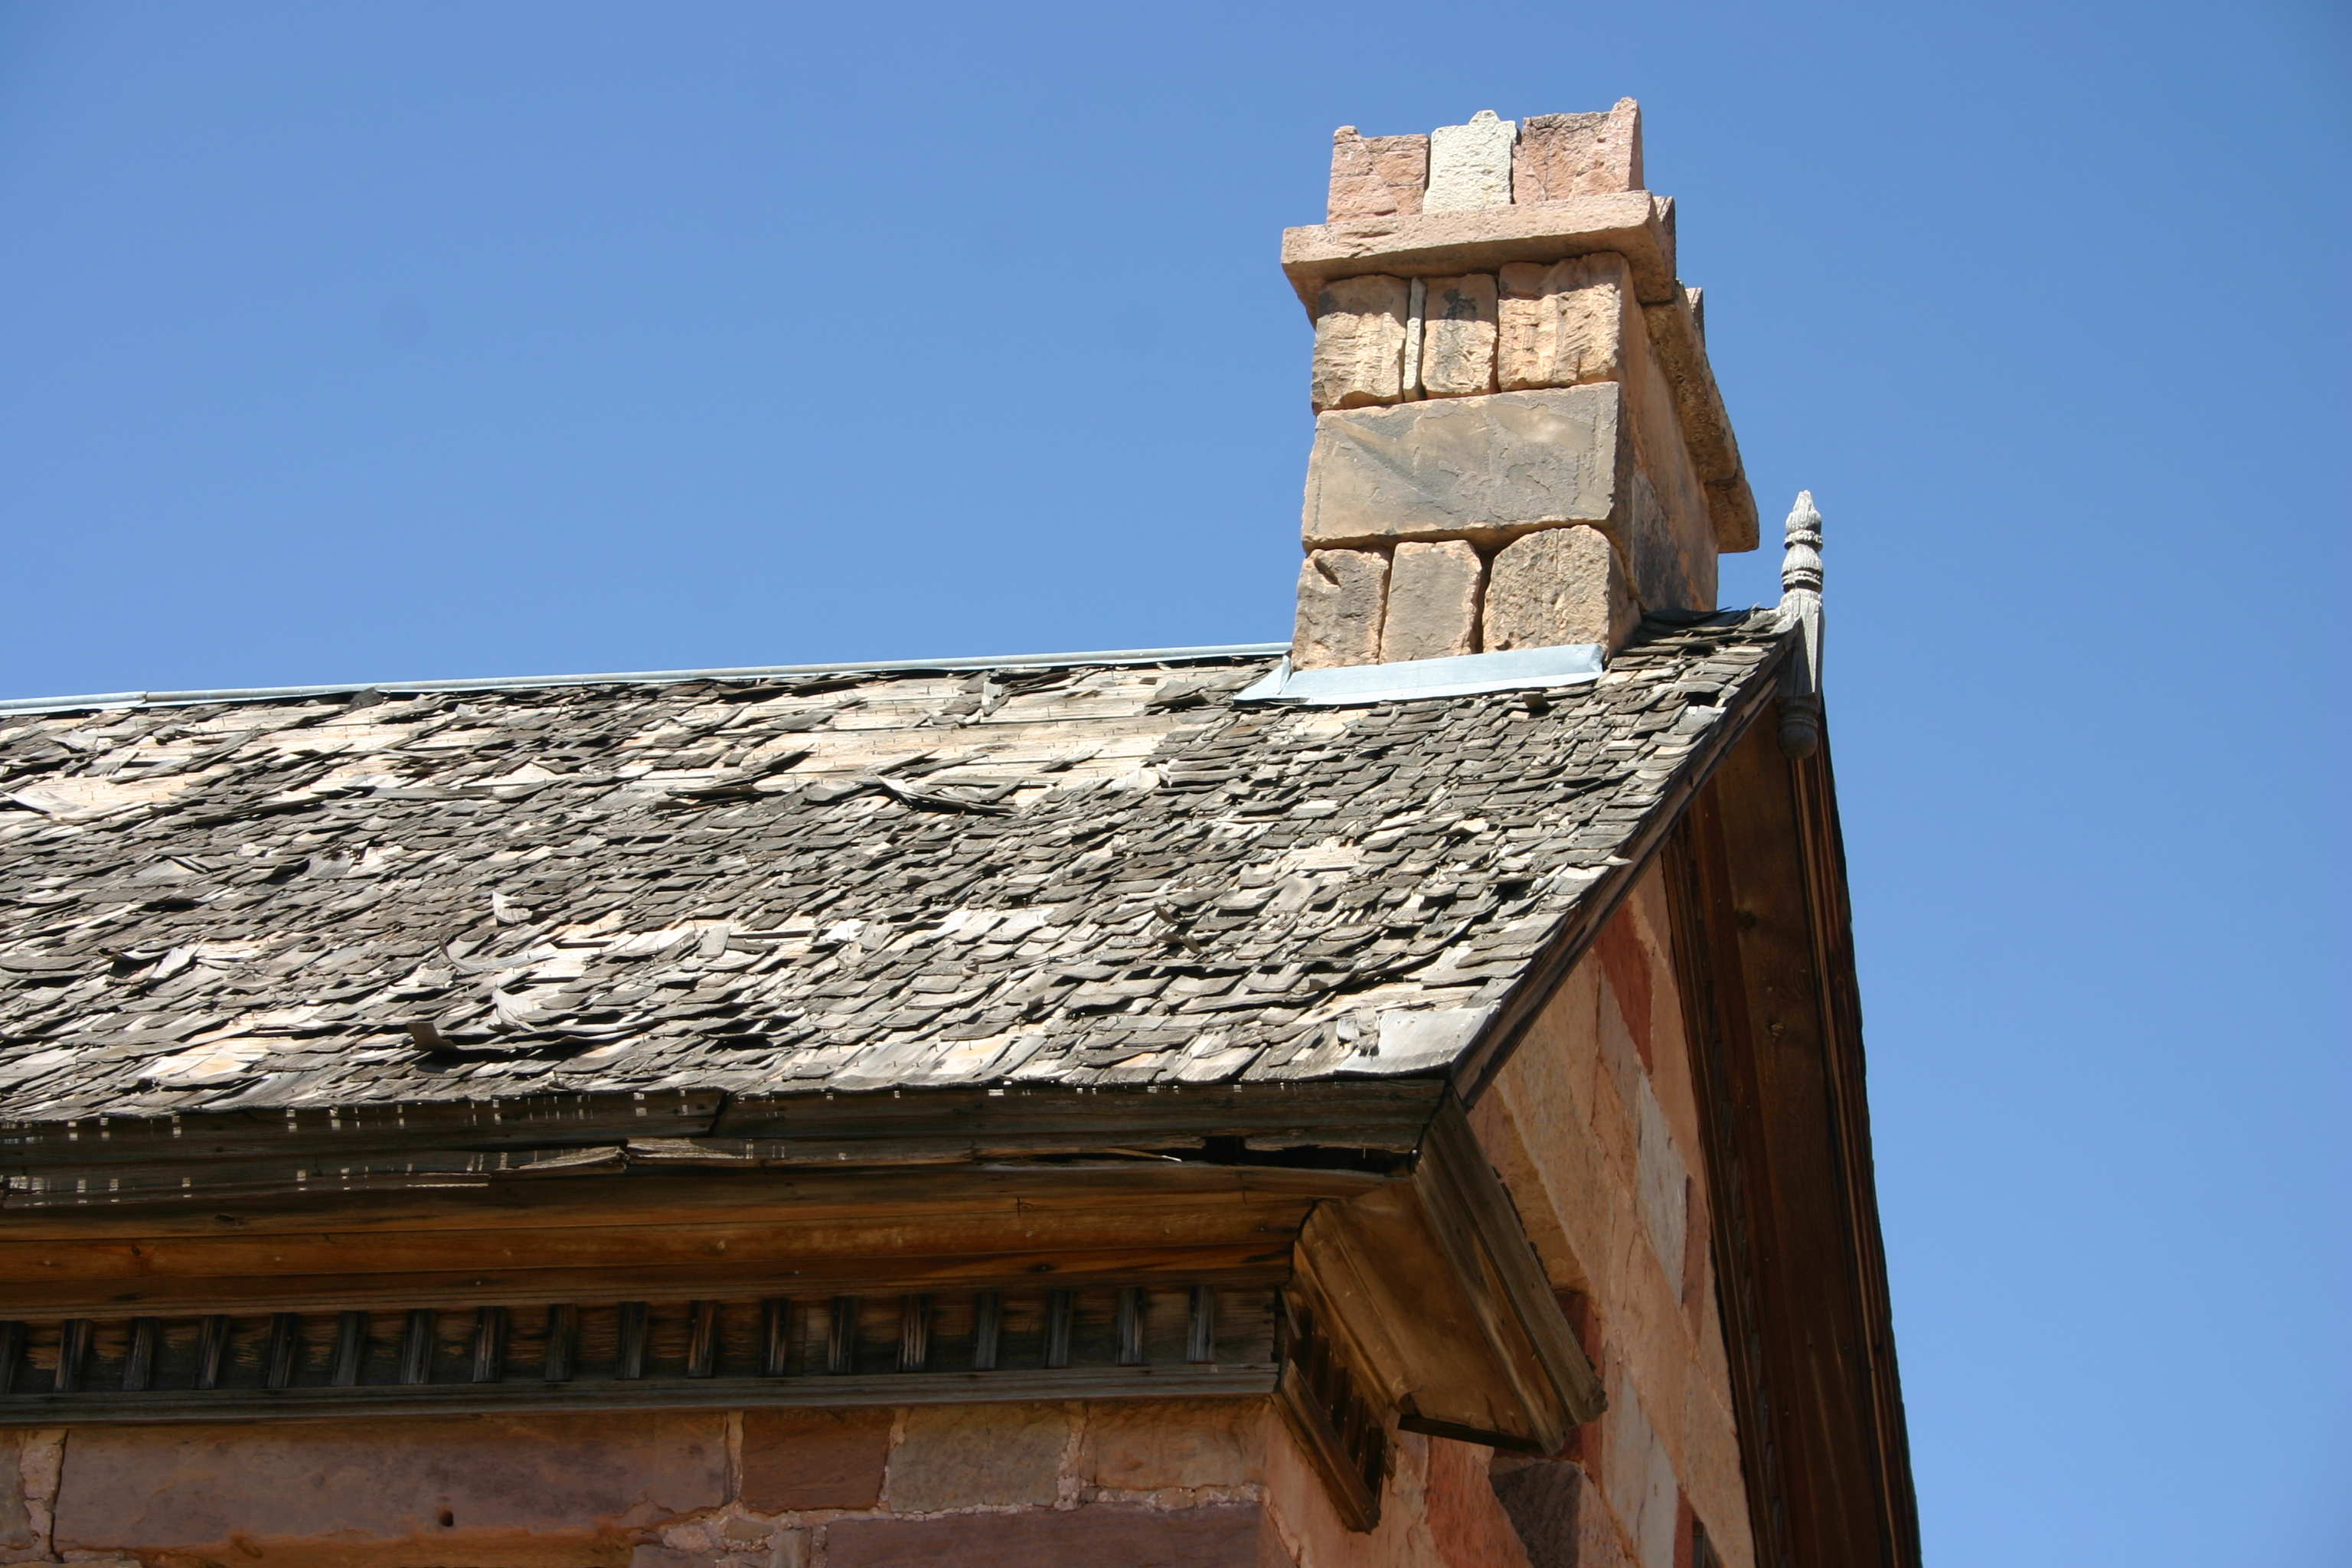 Roof and chimney of the DeMille Rock House at Shunesburg